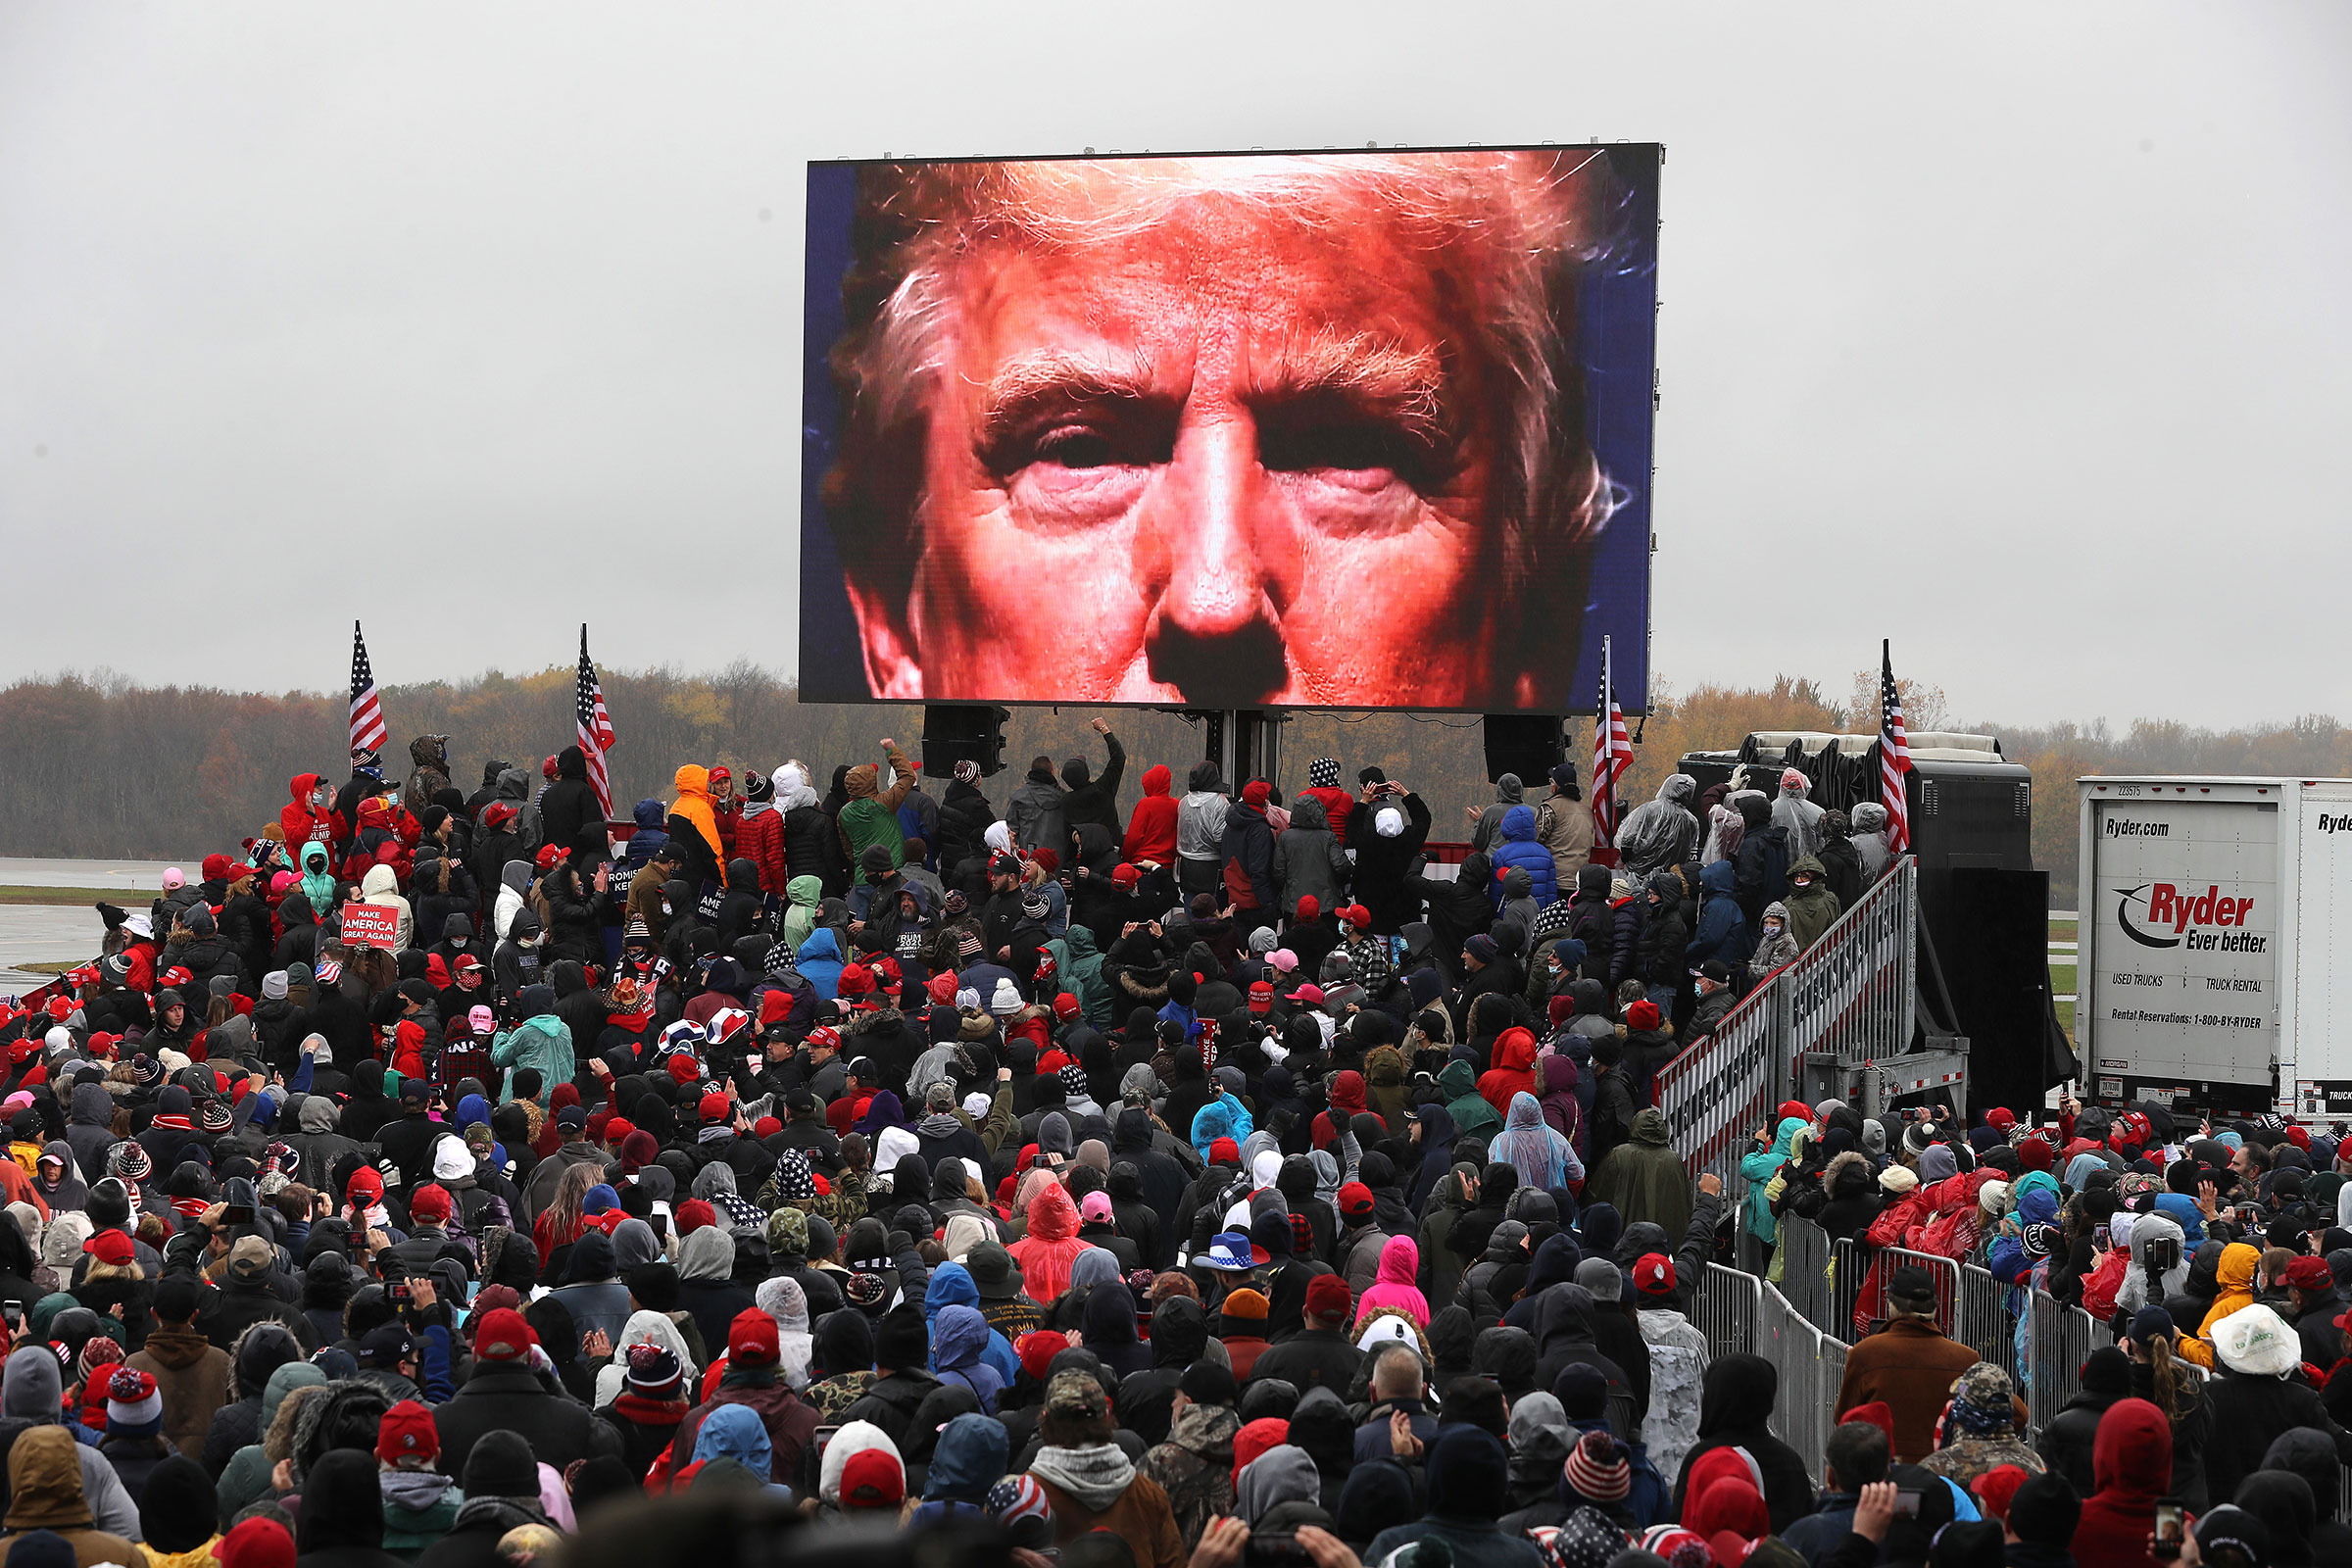 Supporters watch a video of President Donald Trump while waiting for his arrival at a campaign rally at Capital Region International Airport in Lansing, Mich. on Oct. 27, 2020. (Chip Somodevilla—Getty Images)